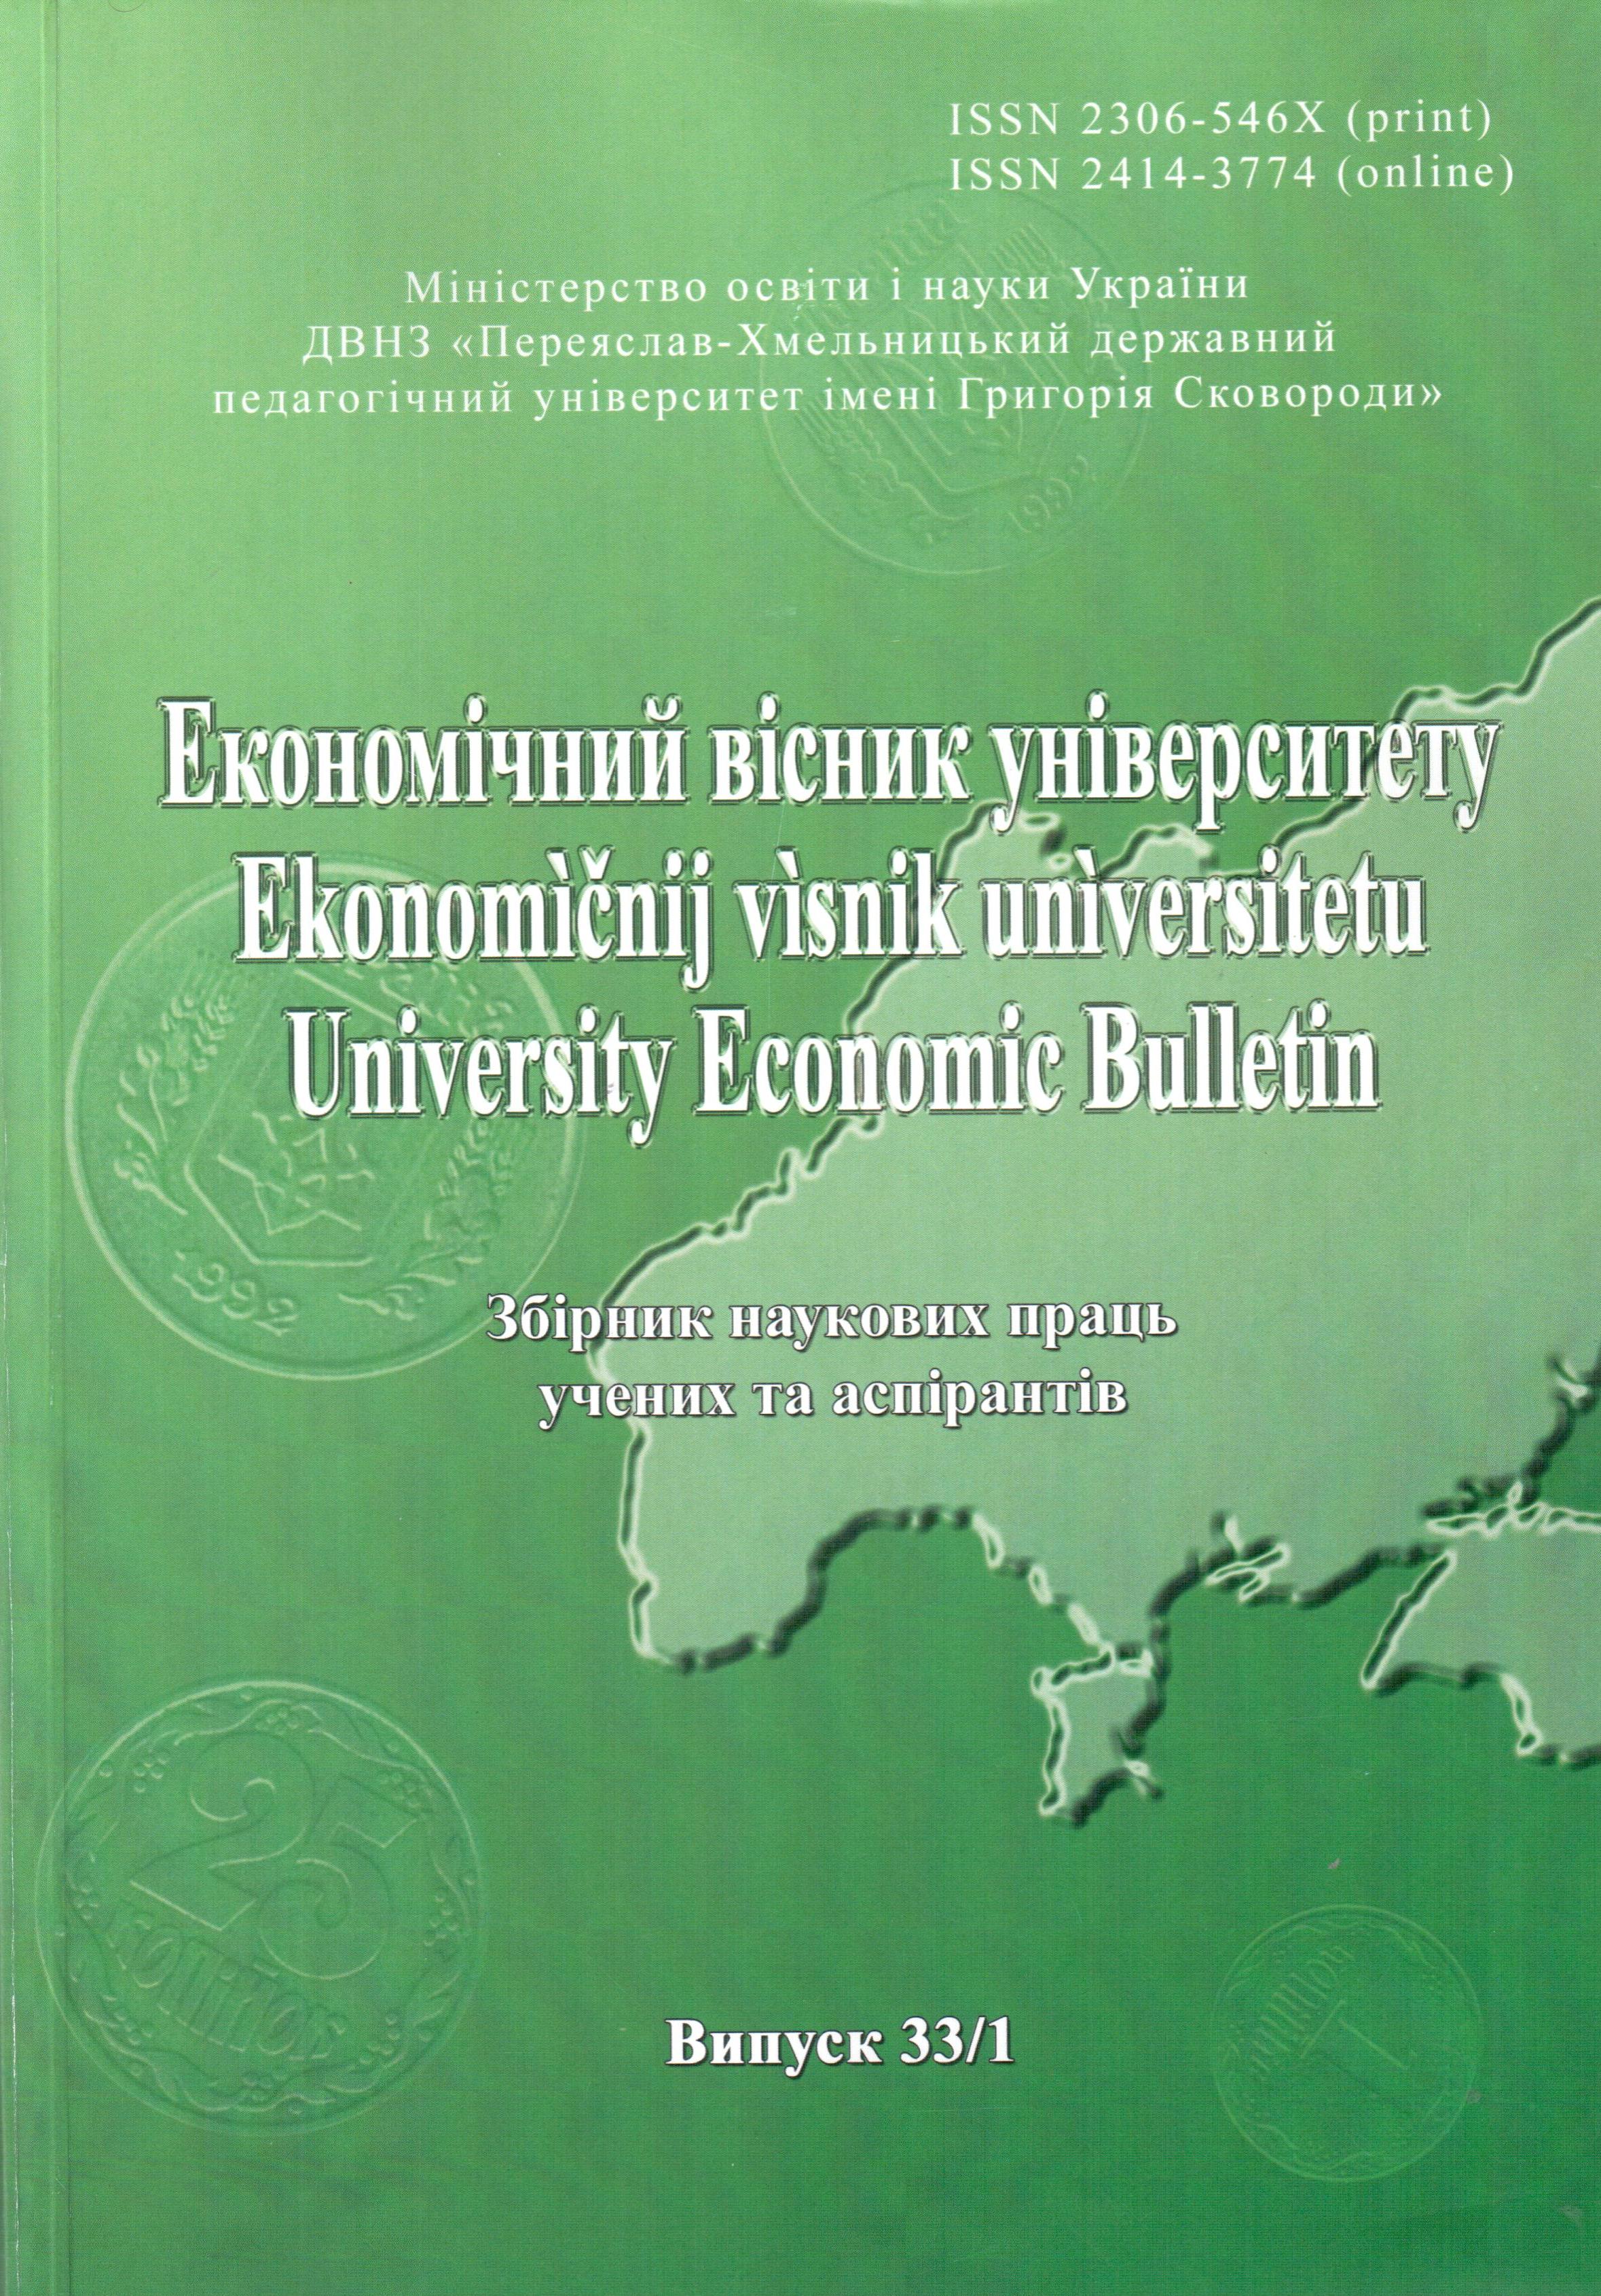 Formation and development of the innovative project and program management system  in the budgetary sphere in Ukraine Cover Image